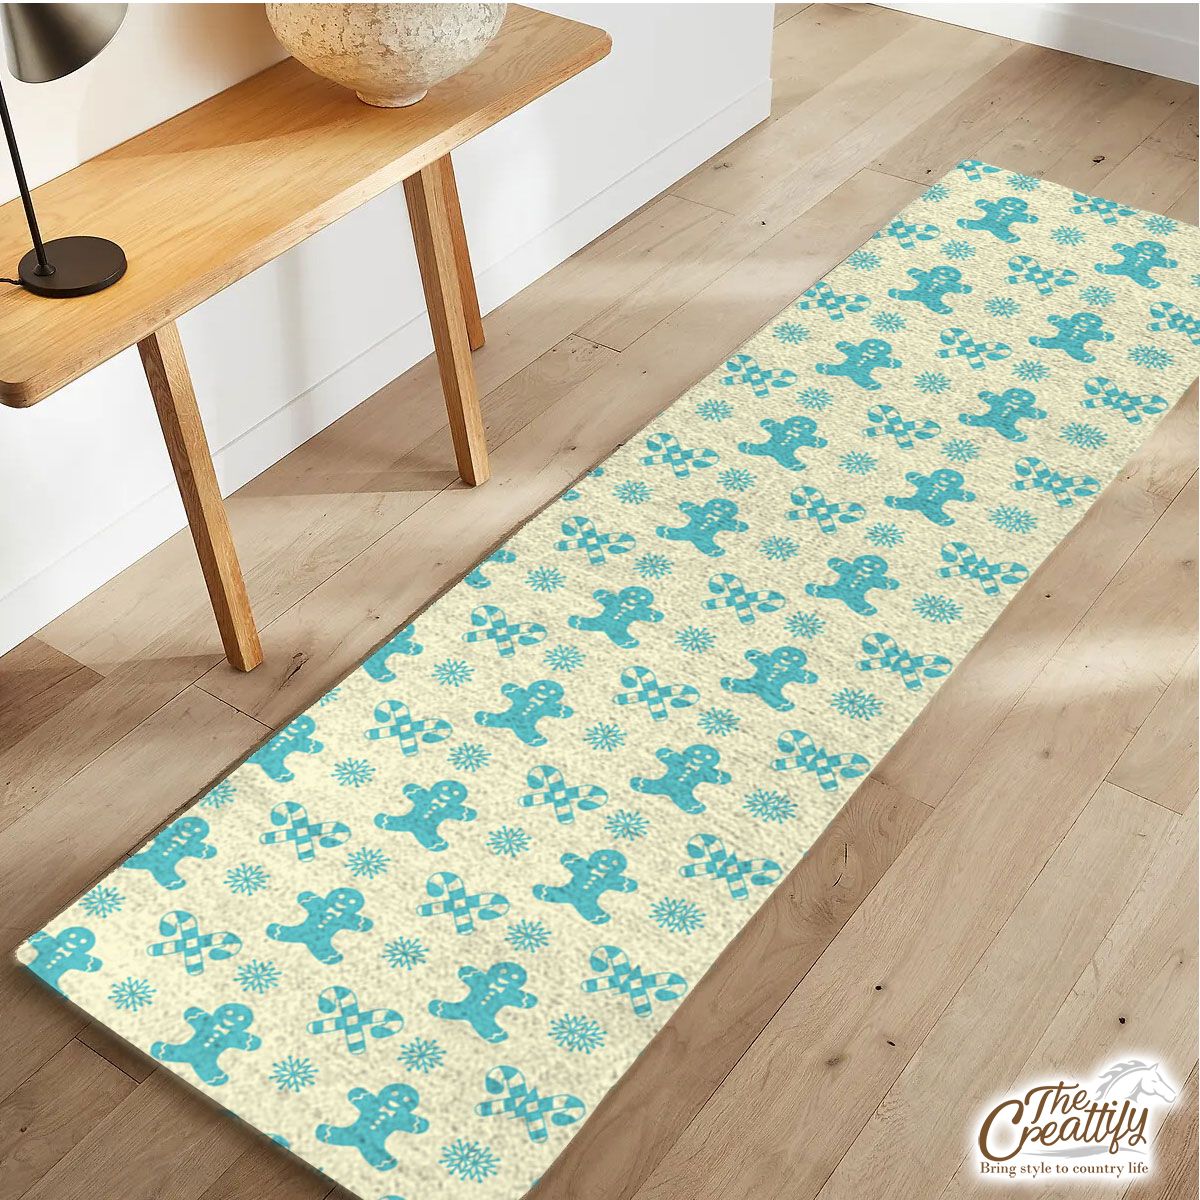 Christmas Gingerbread Man, Candy Cane On Snowflake Background Runner Carpet